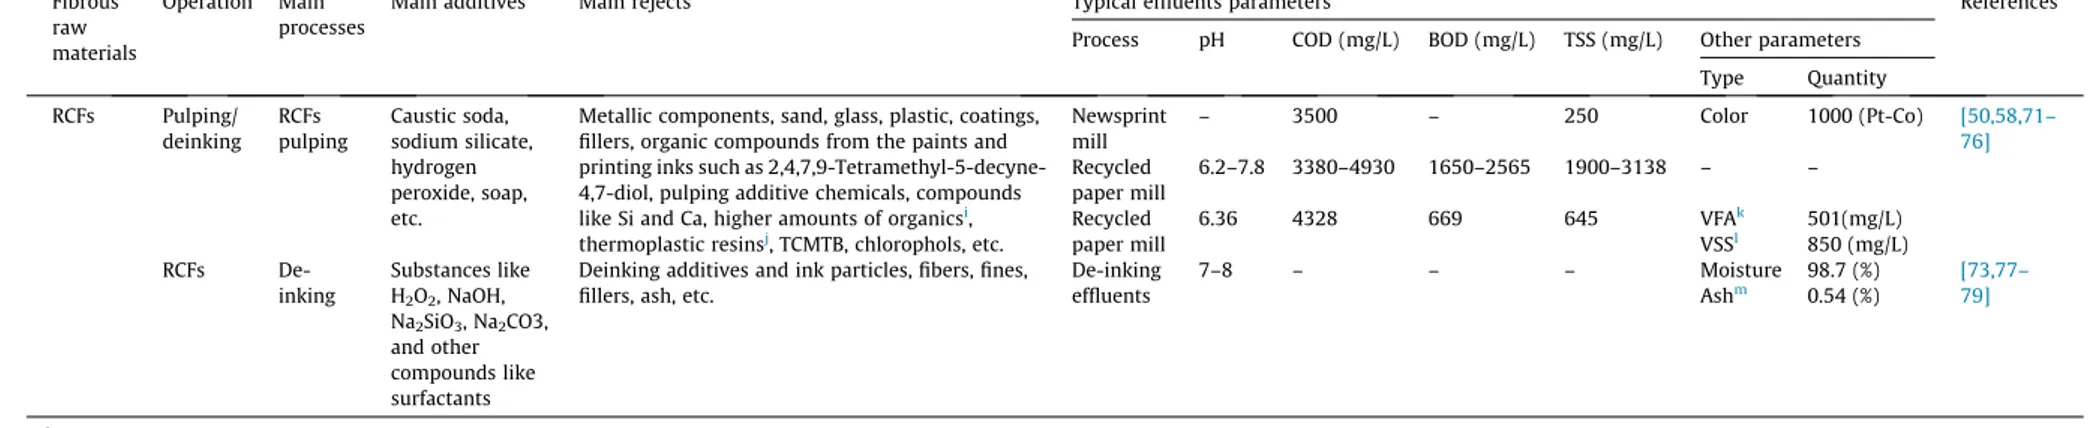 Table 1 (continued) Fibrous raw materials Operation Main processes